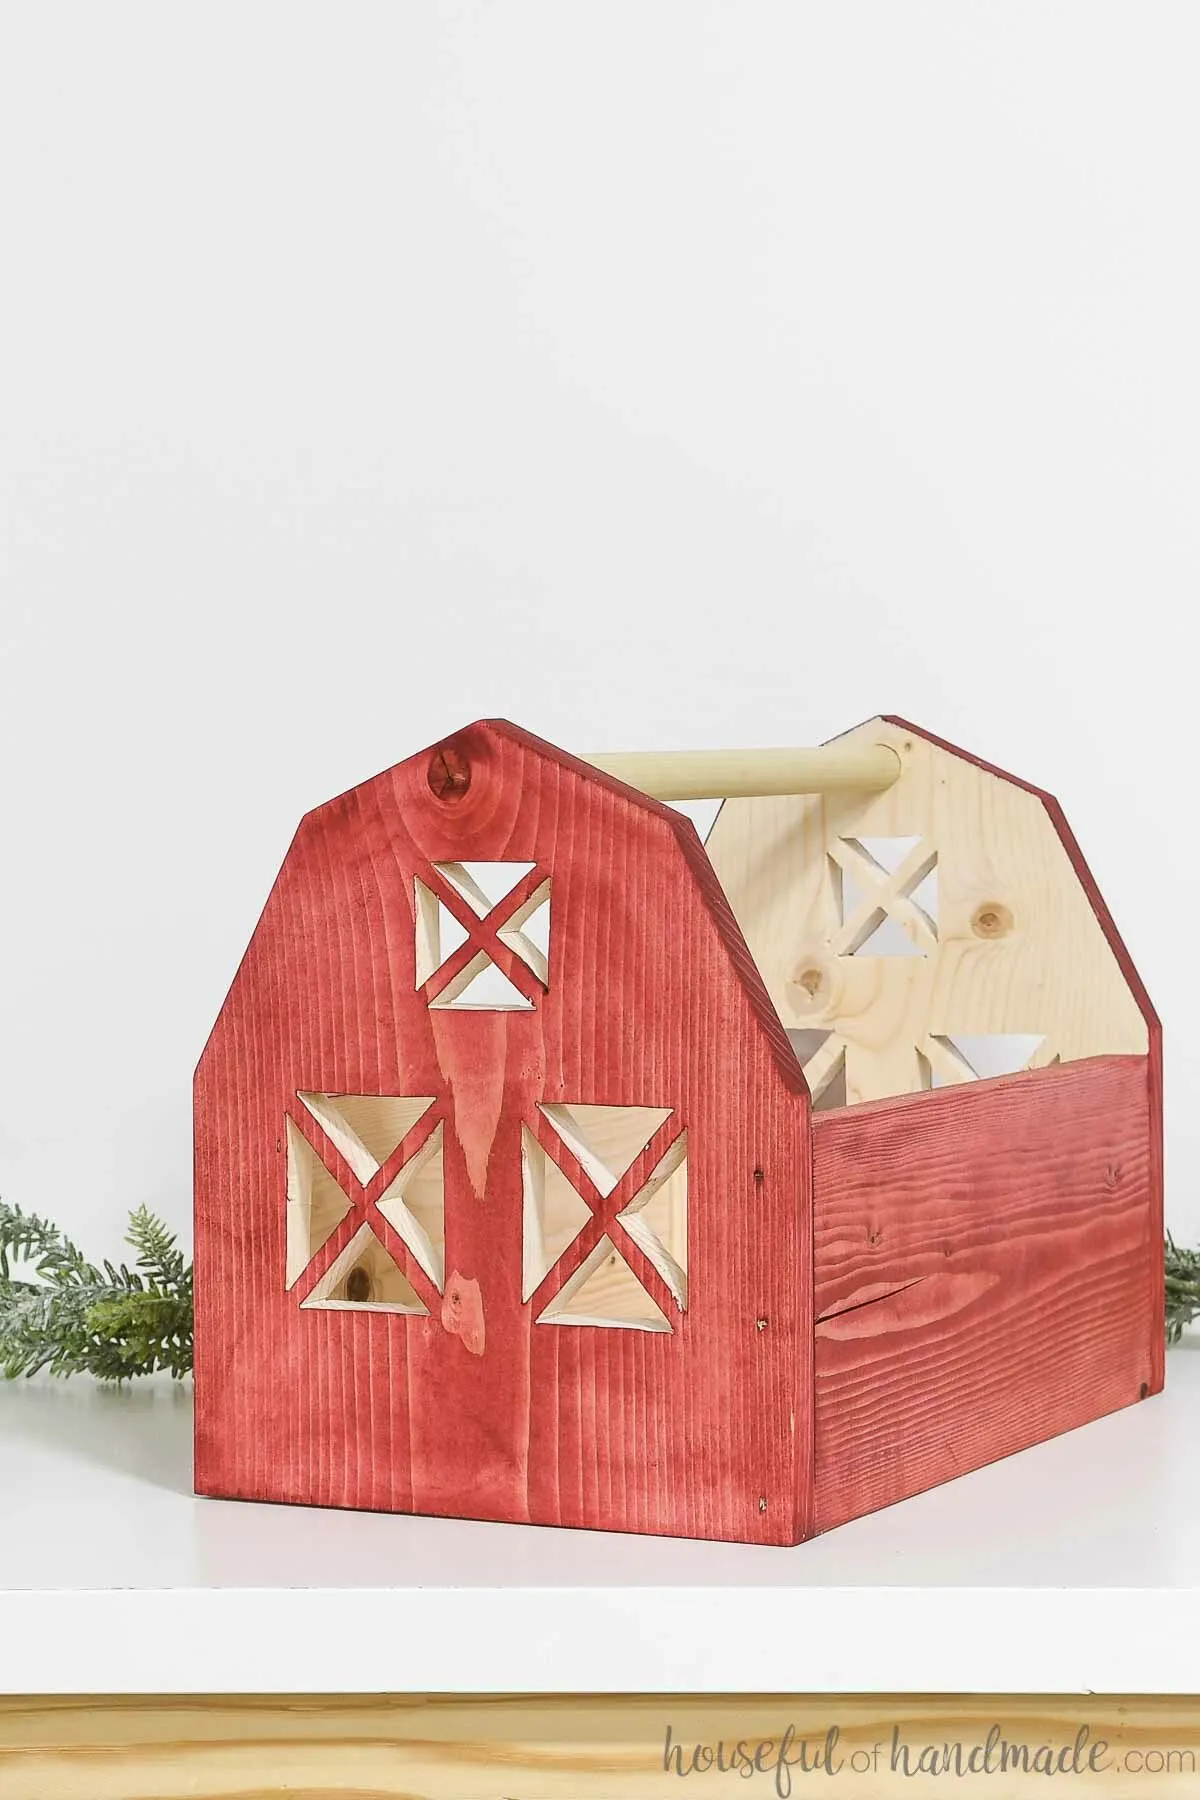 Wood toy barn with three sides and a handle on top to carry it around. 